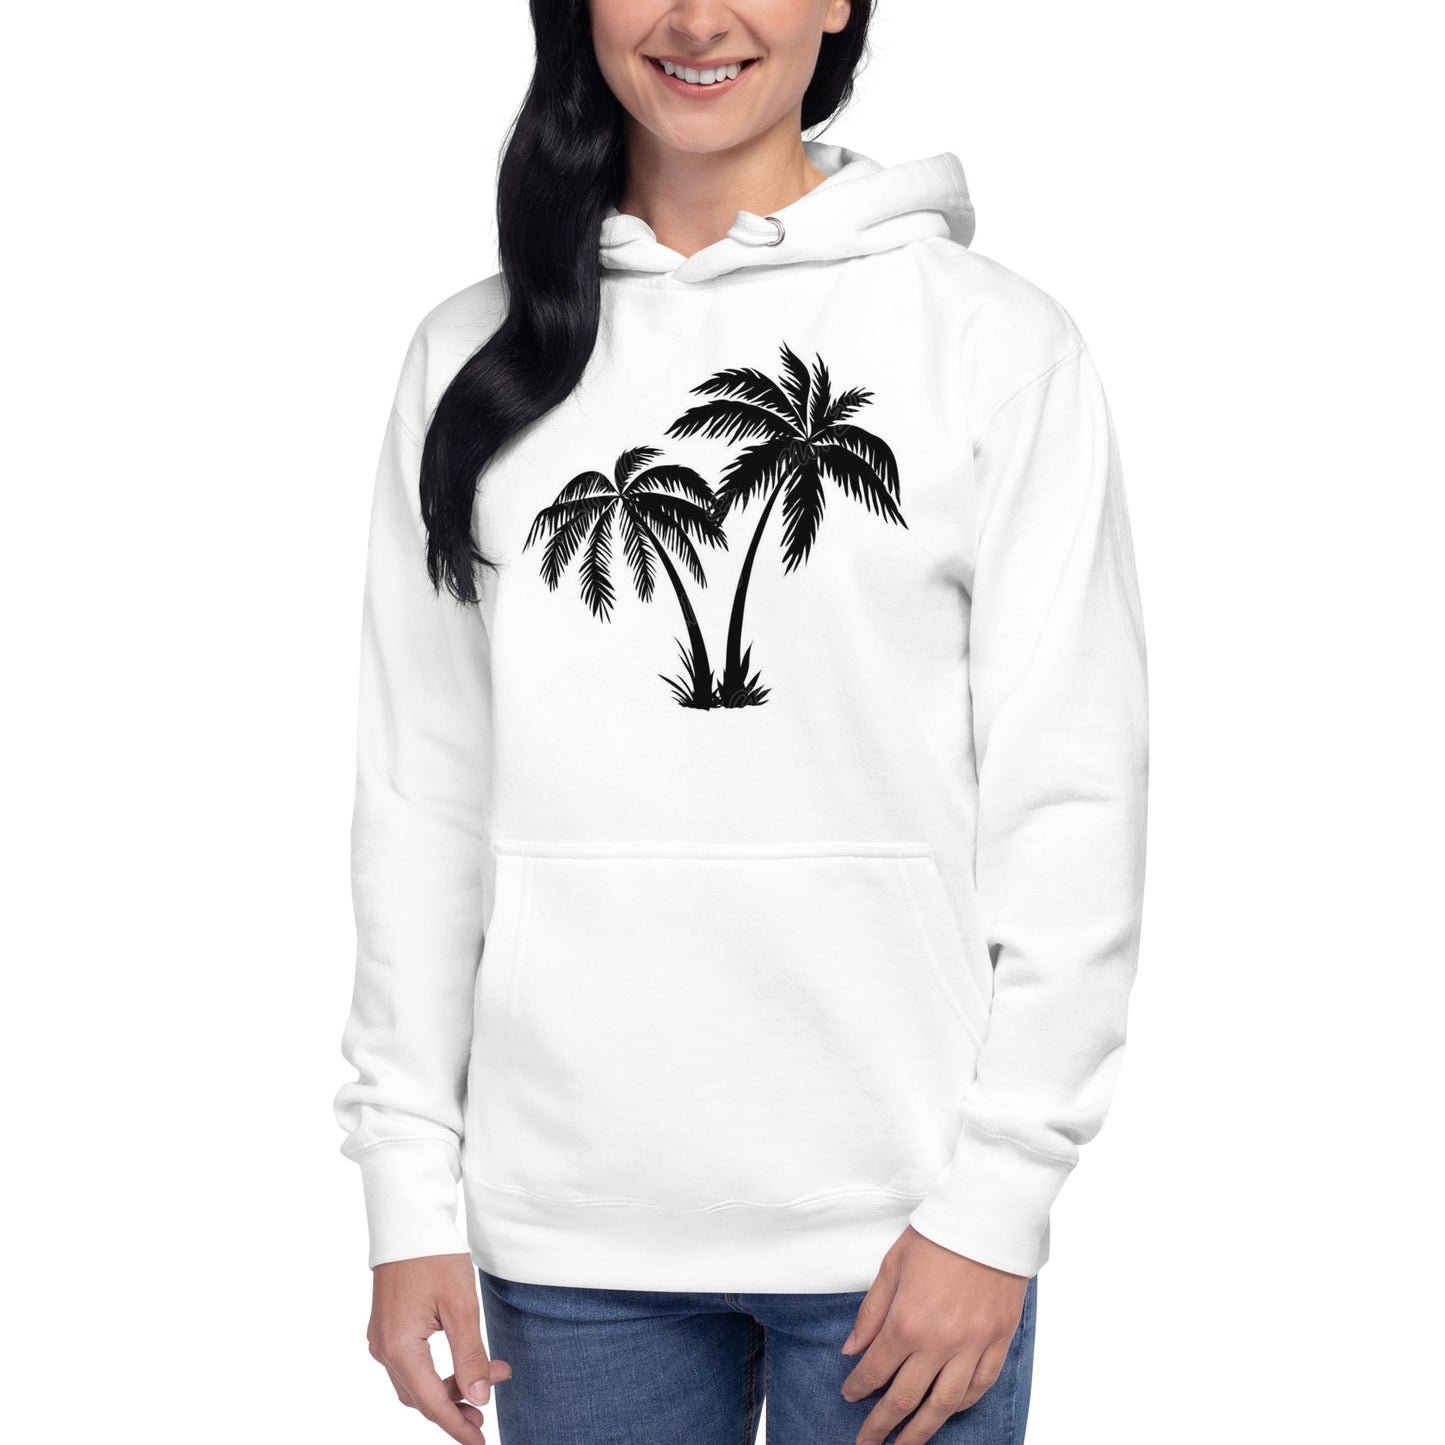 SUNZOUT Unisex Hoodie - Sunzout Outdoor Spaces LLC